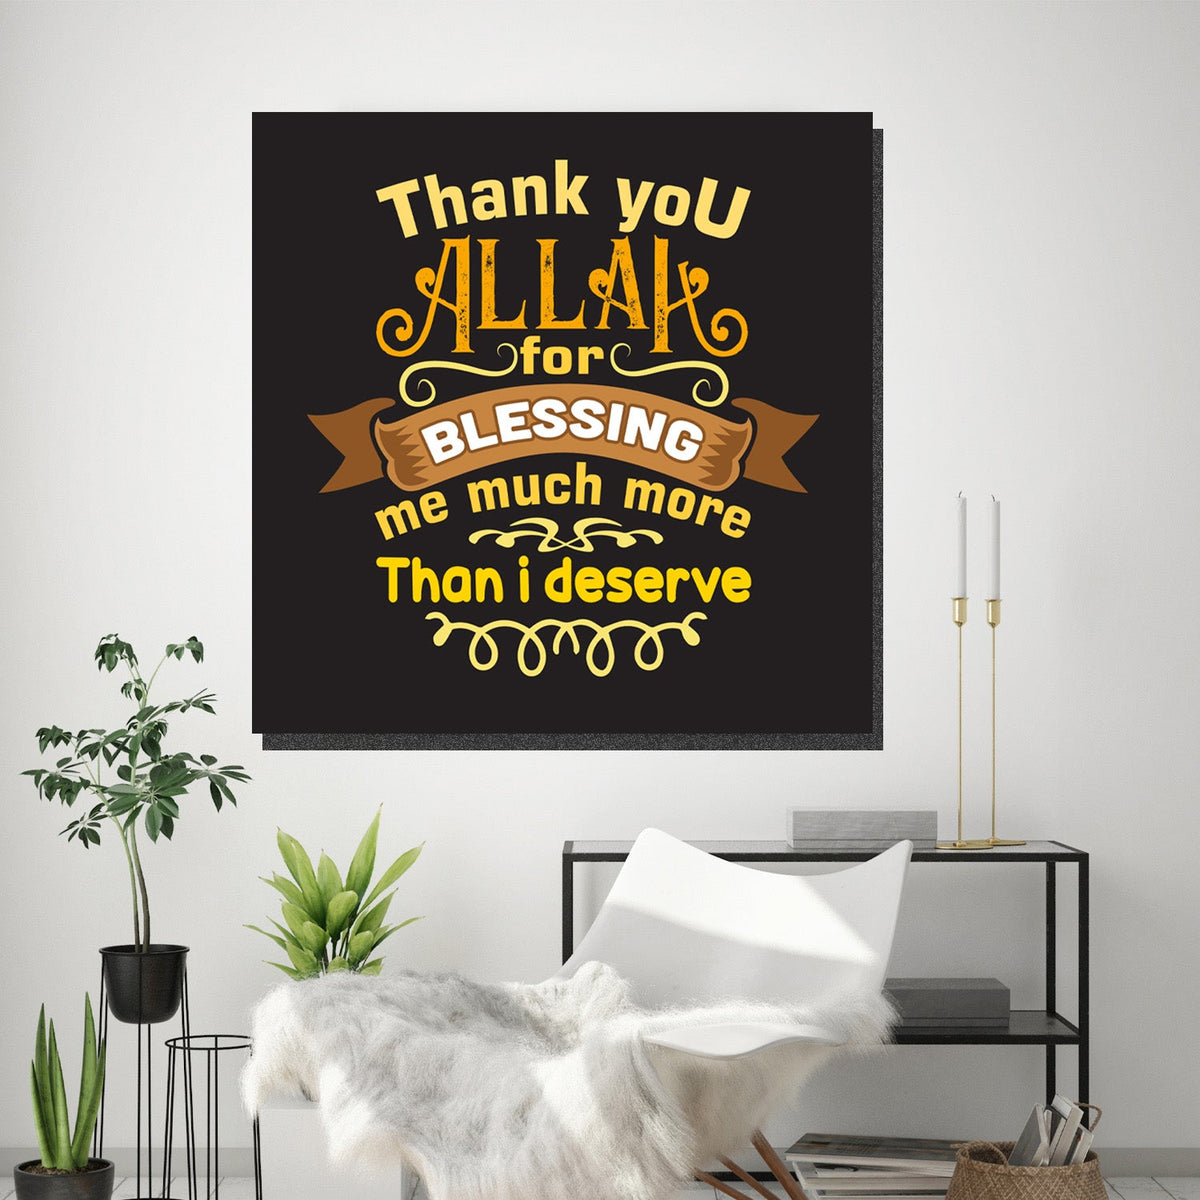 https://cdn.shopify.com/s/files/1/0387/9986/8044/products/ThankYouAllahCanvasArtprintStretched-4.jpg